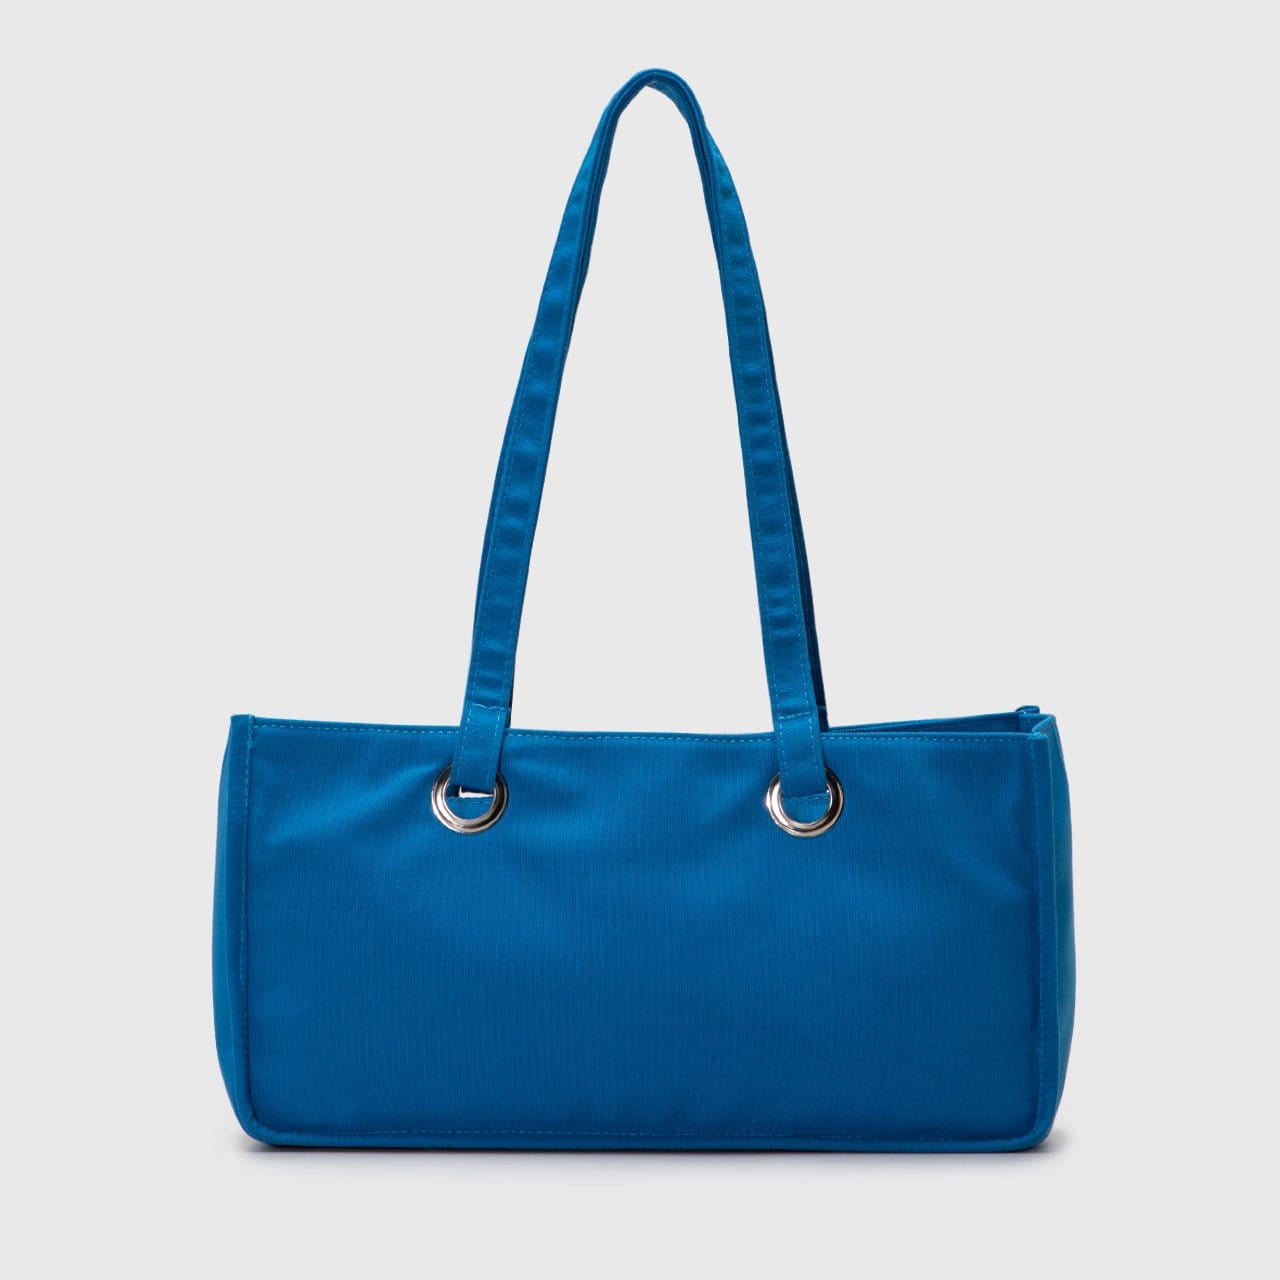 Adorable Projects Official Hand Bag Sardinia Bag Blue